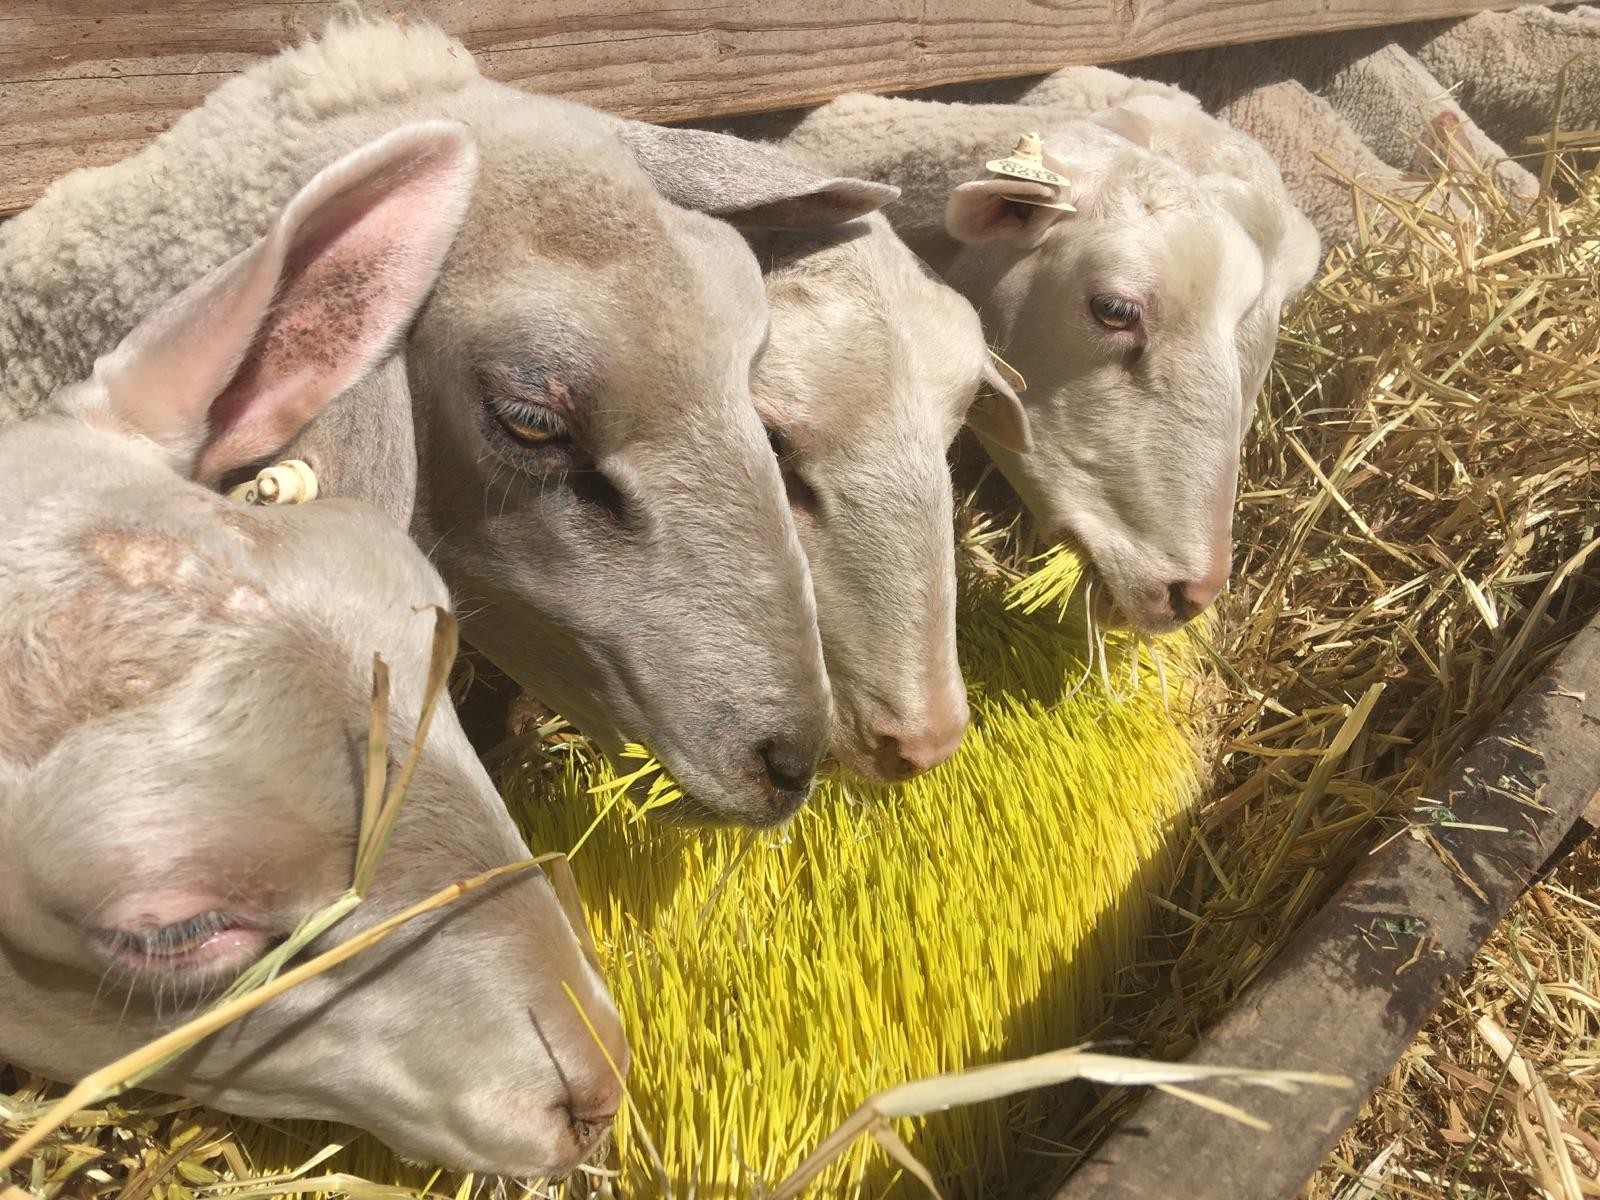 Mario Daccarett says the sprouted barley seeds he grows inside shipping containers are sweet and keeps his sheep full for longer. Ezra David Romero/KQED